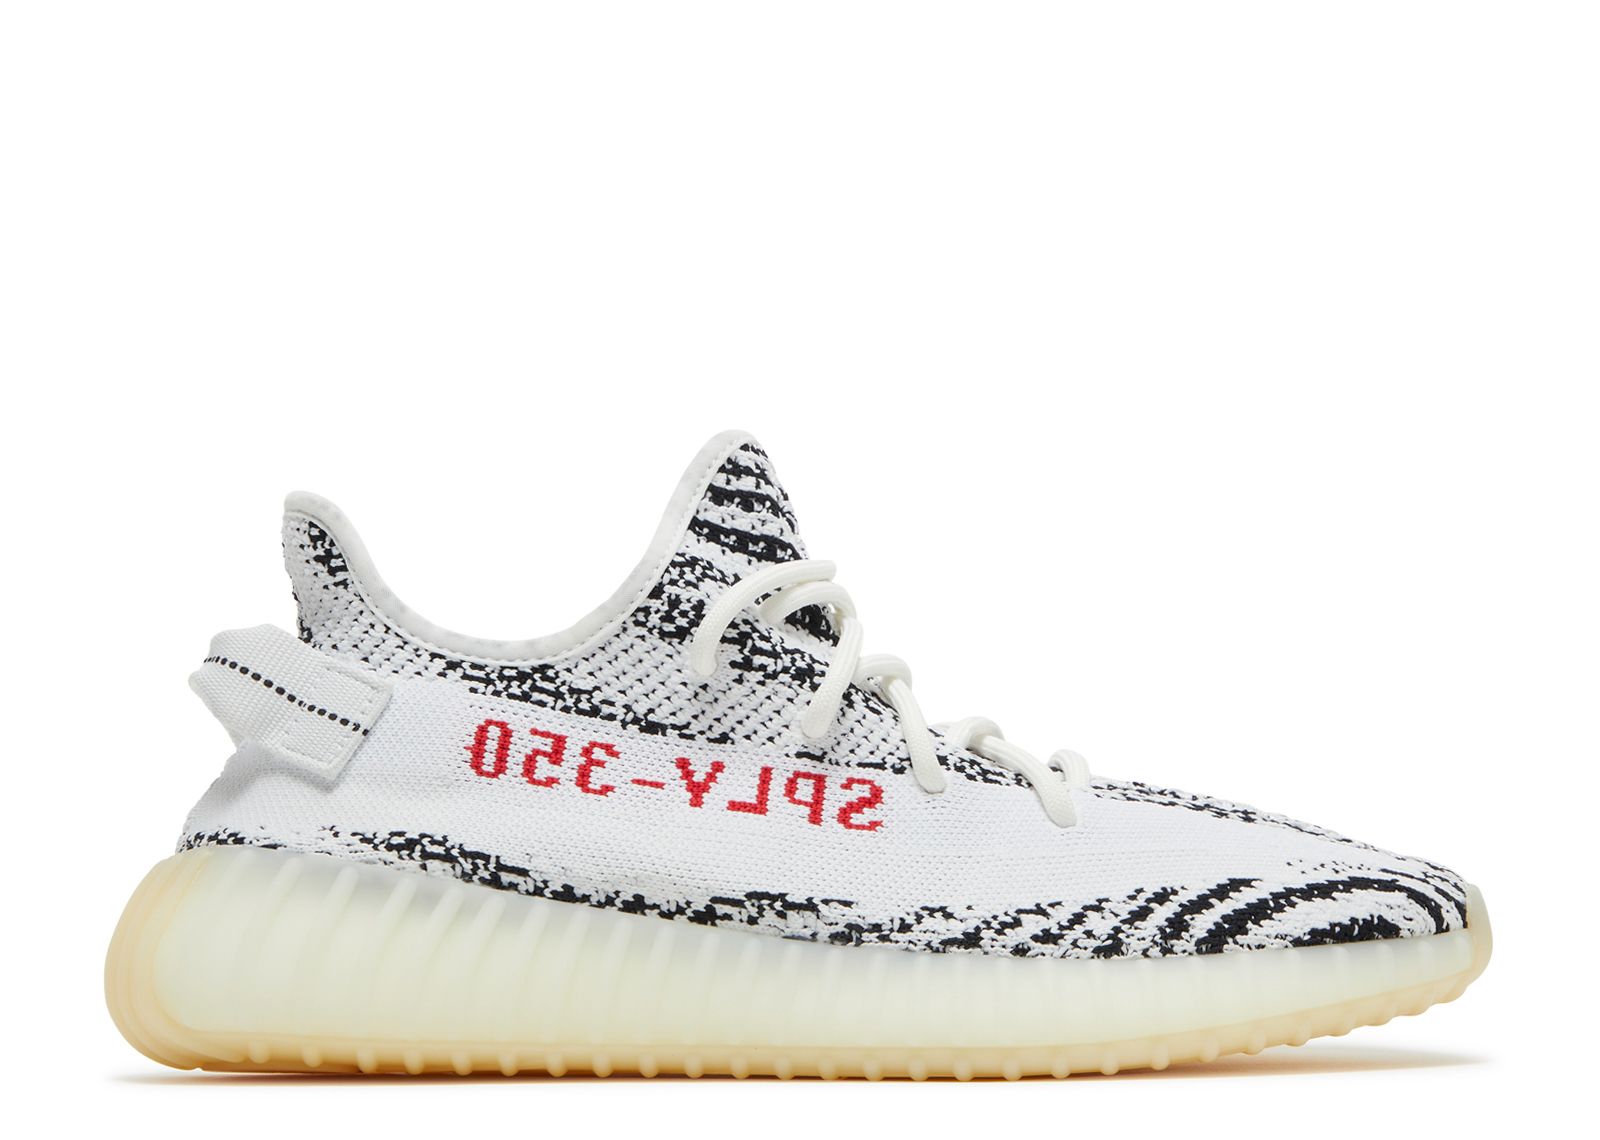 Find The Latest Styles Yeezy Boost 350 V2 Zebra Chicago 93% Off Sale